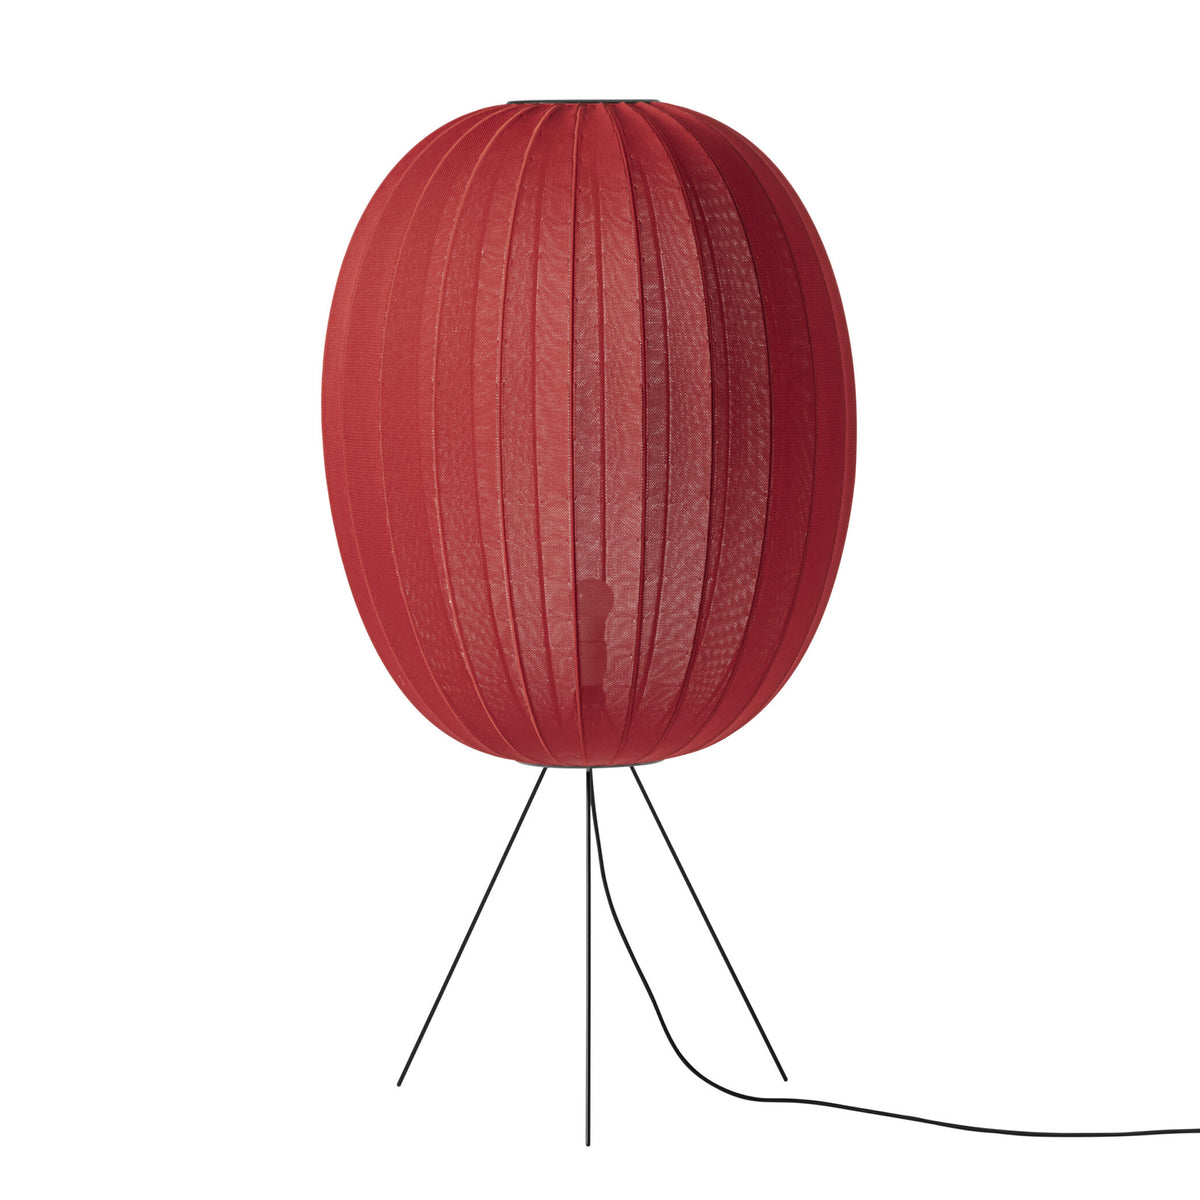 Made by Hand, Knit-Wit Medium Floor Lamp 65, Maple Red, Floor,